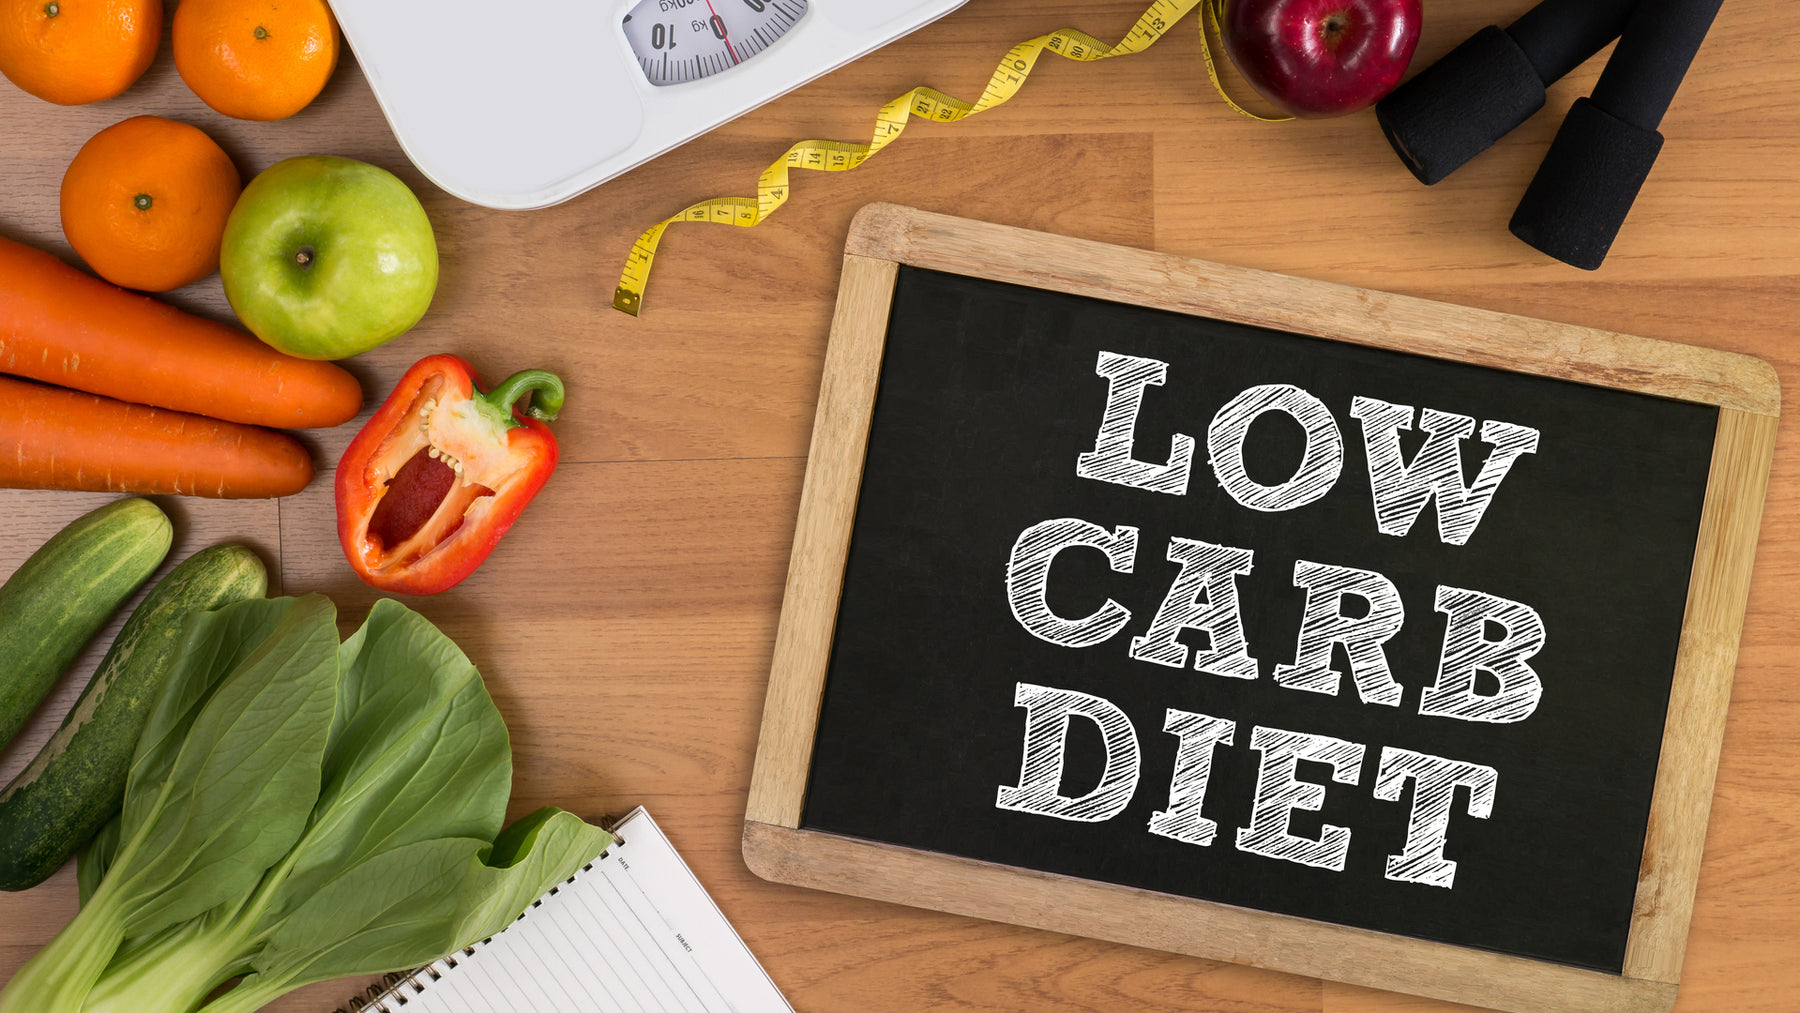 What Food Can I Eat on a Low Carbohydrate Diet?